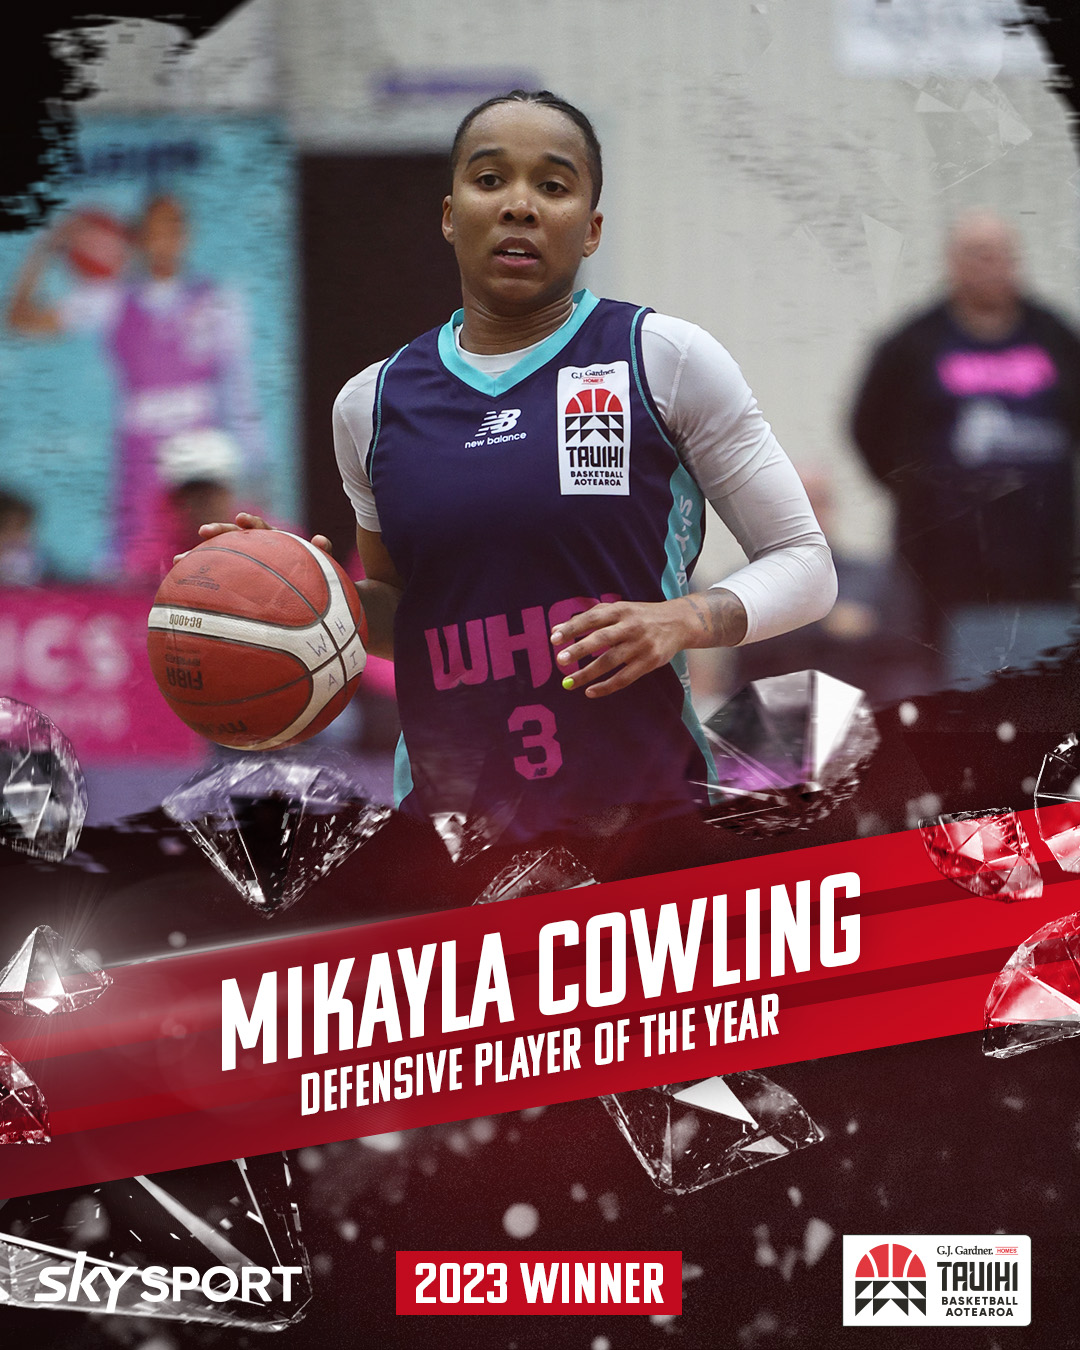 Defensive Player of the Year (Mikayla Cowling)